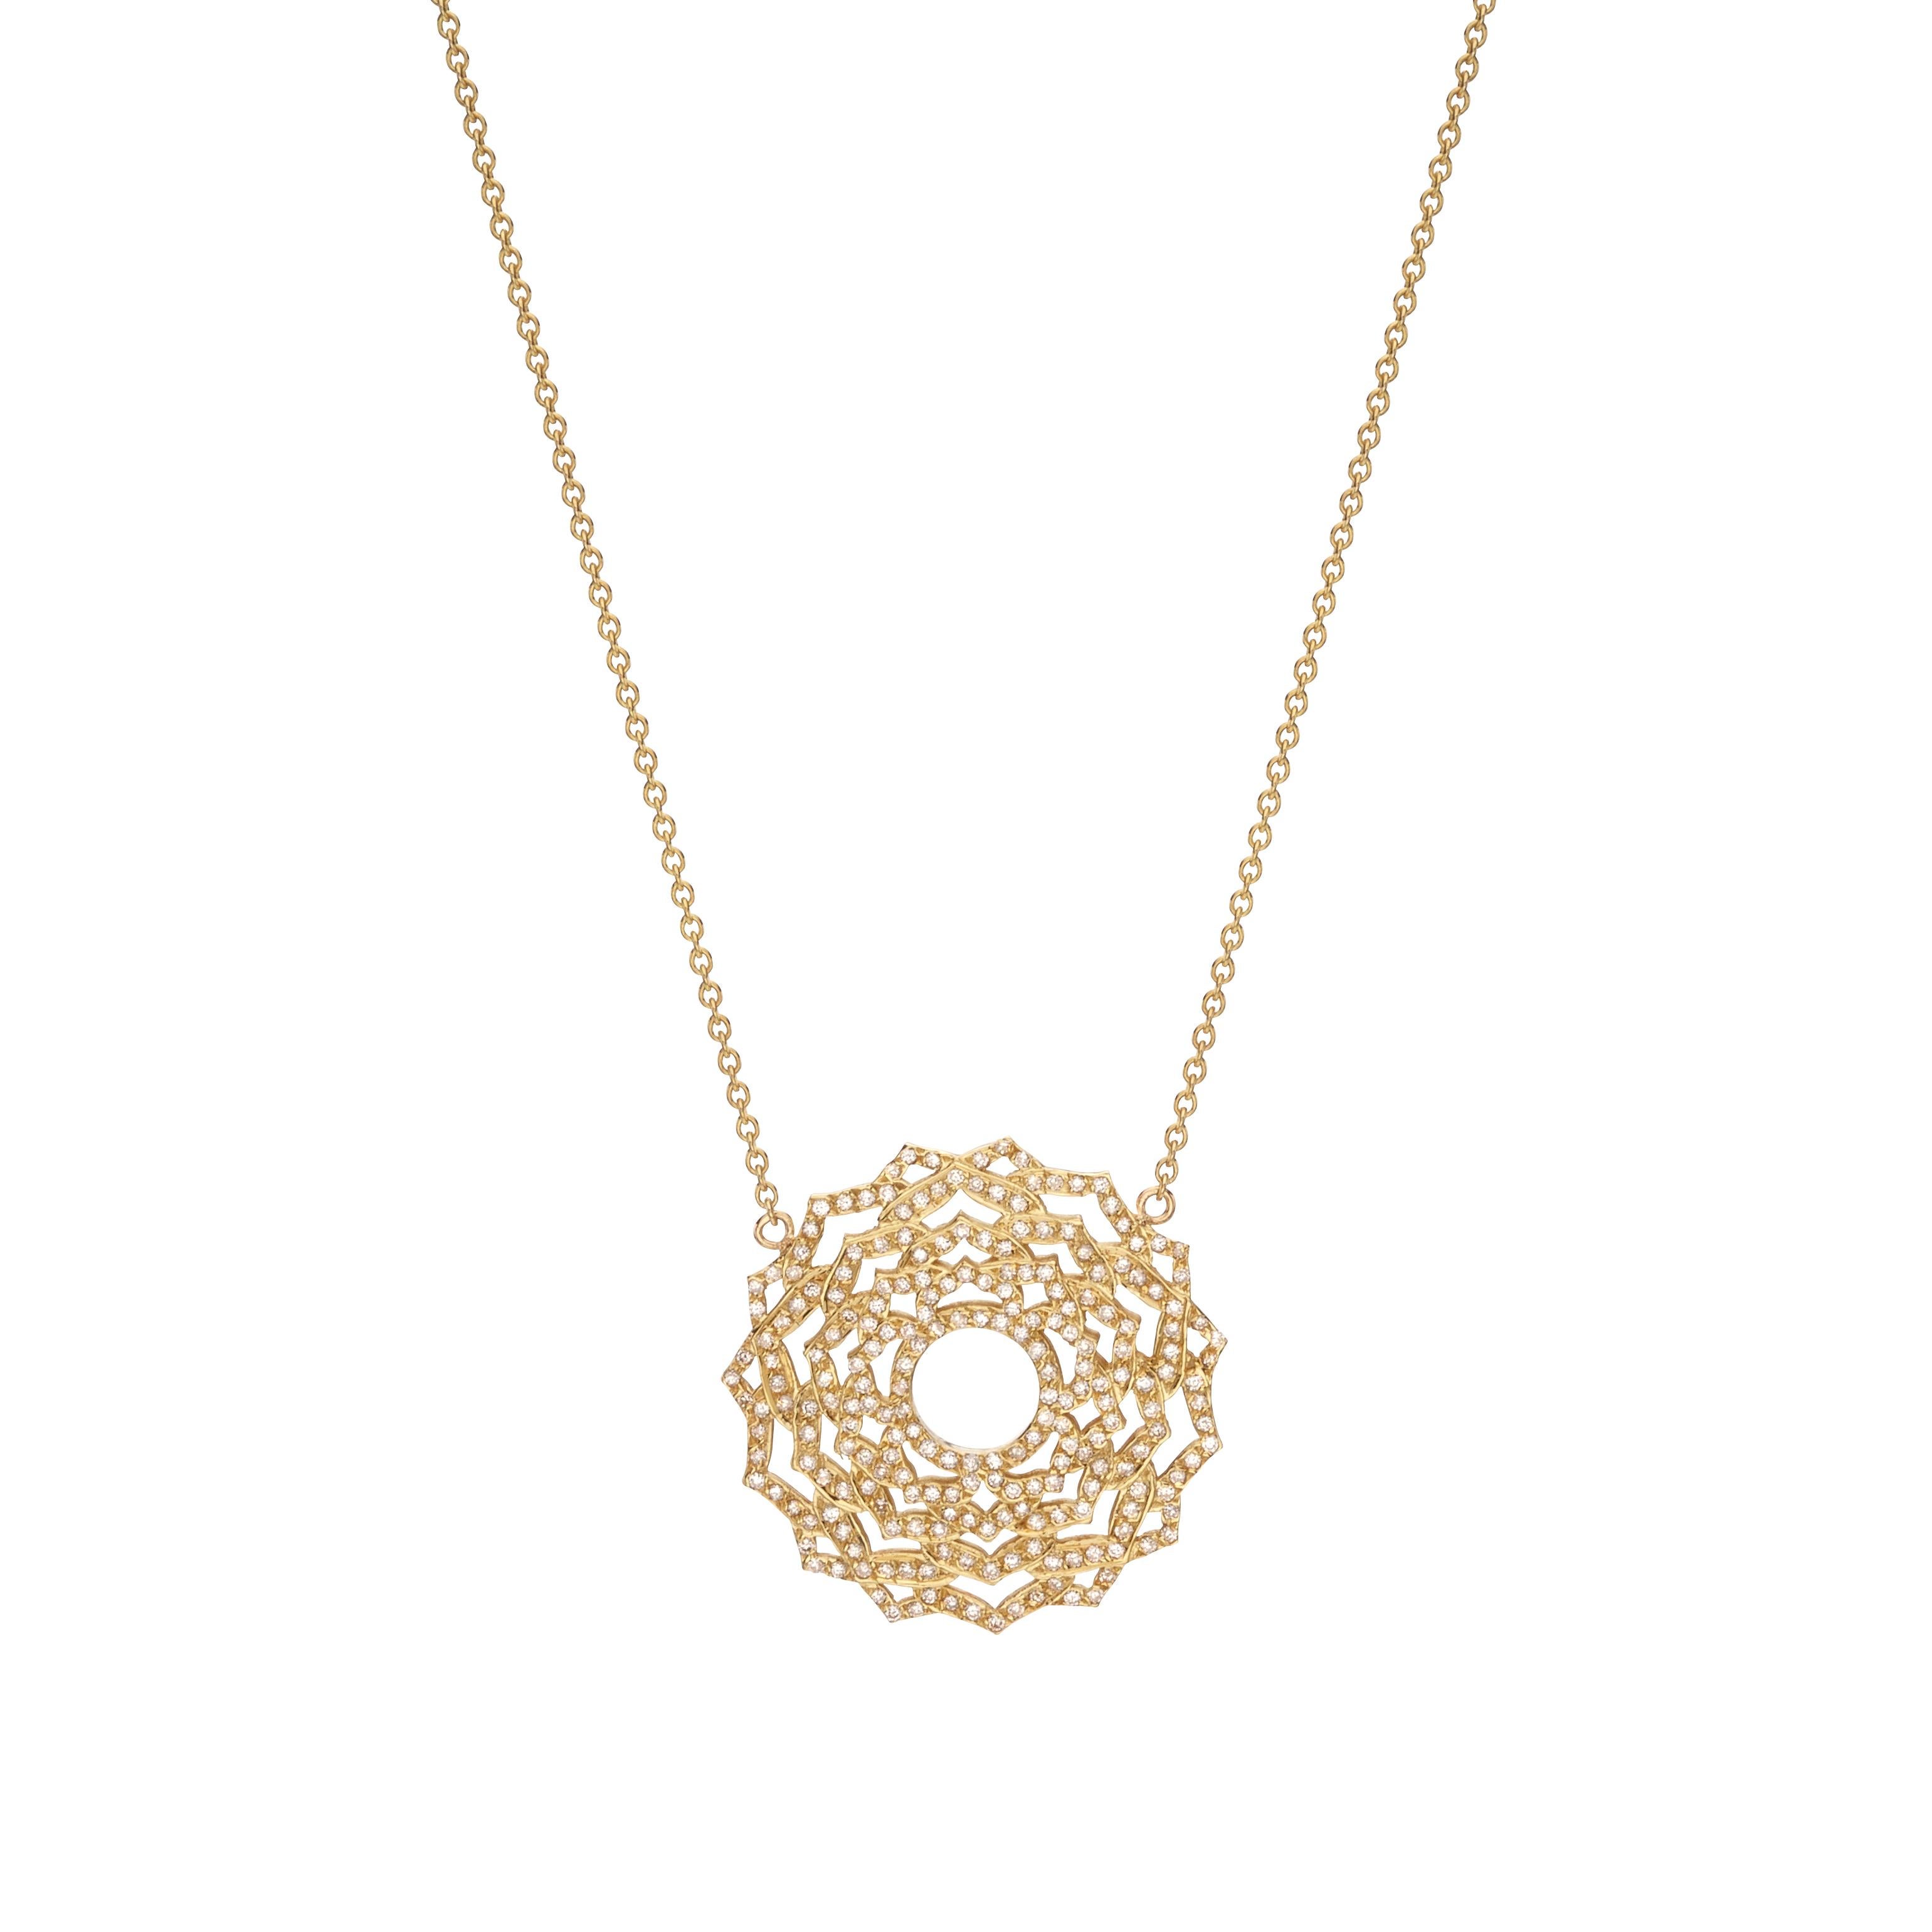 Pendant Necklace with diamonds inspired by Yoga Sahasrara Chakra- The Crown Chakra handcrafted in 14Kt Gold. The Sahasrara Chakra is the mental center of our body that is located on the top of your head. It is strongly connected with wisdom,